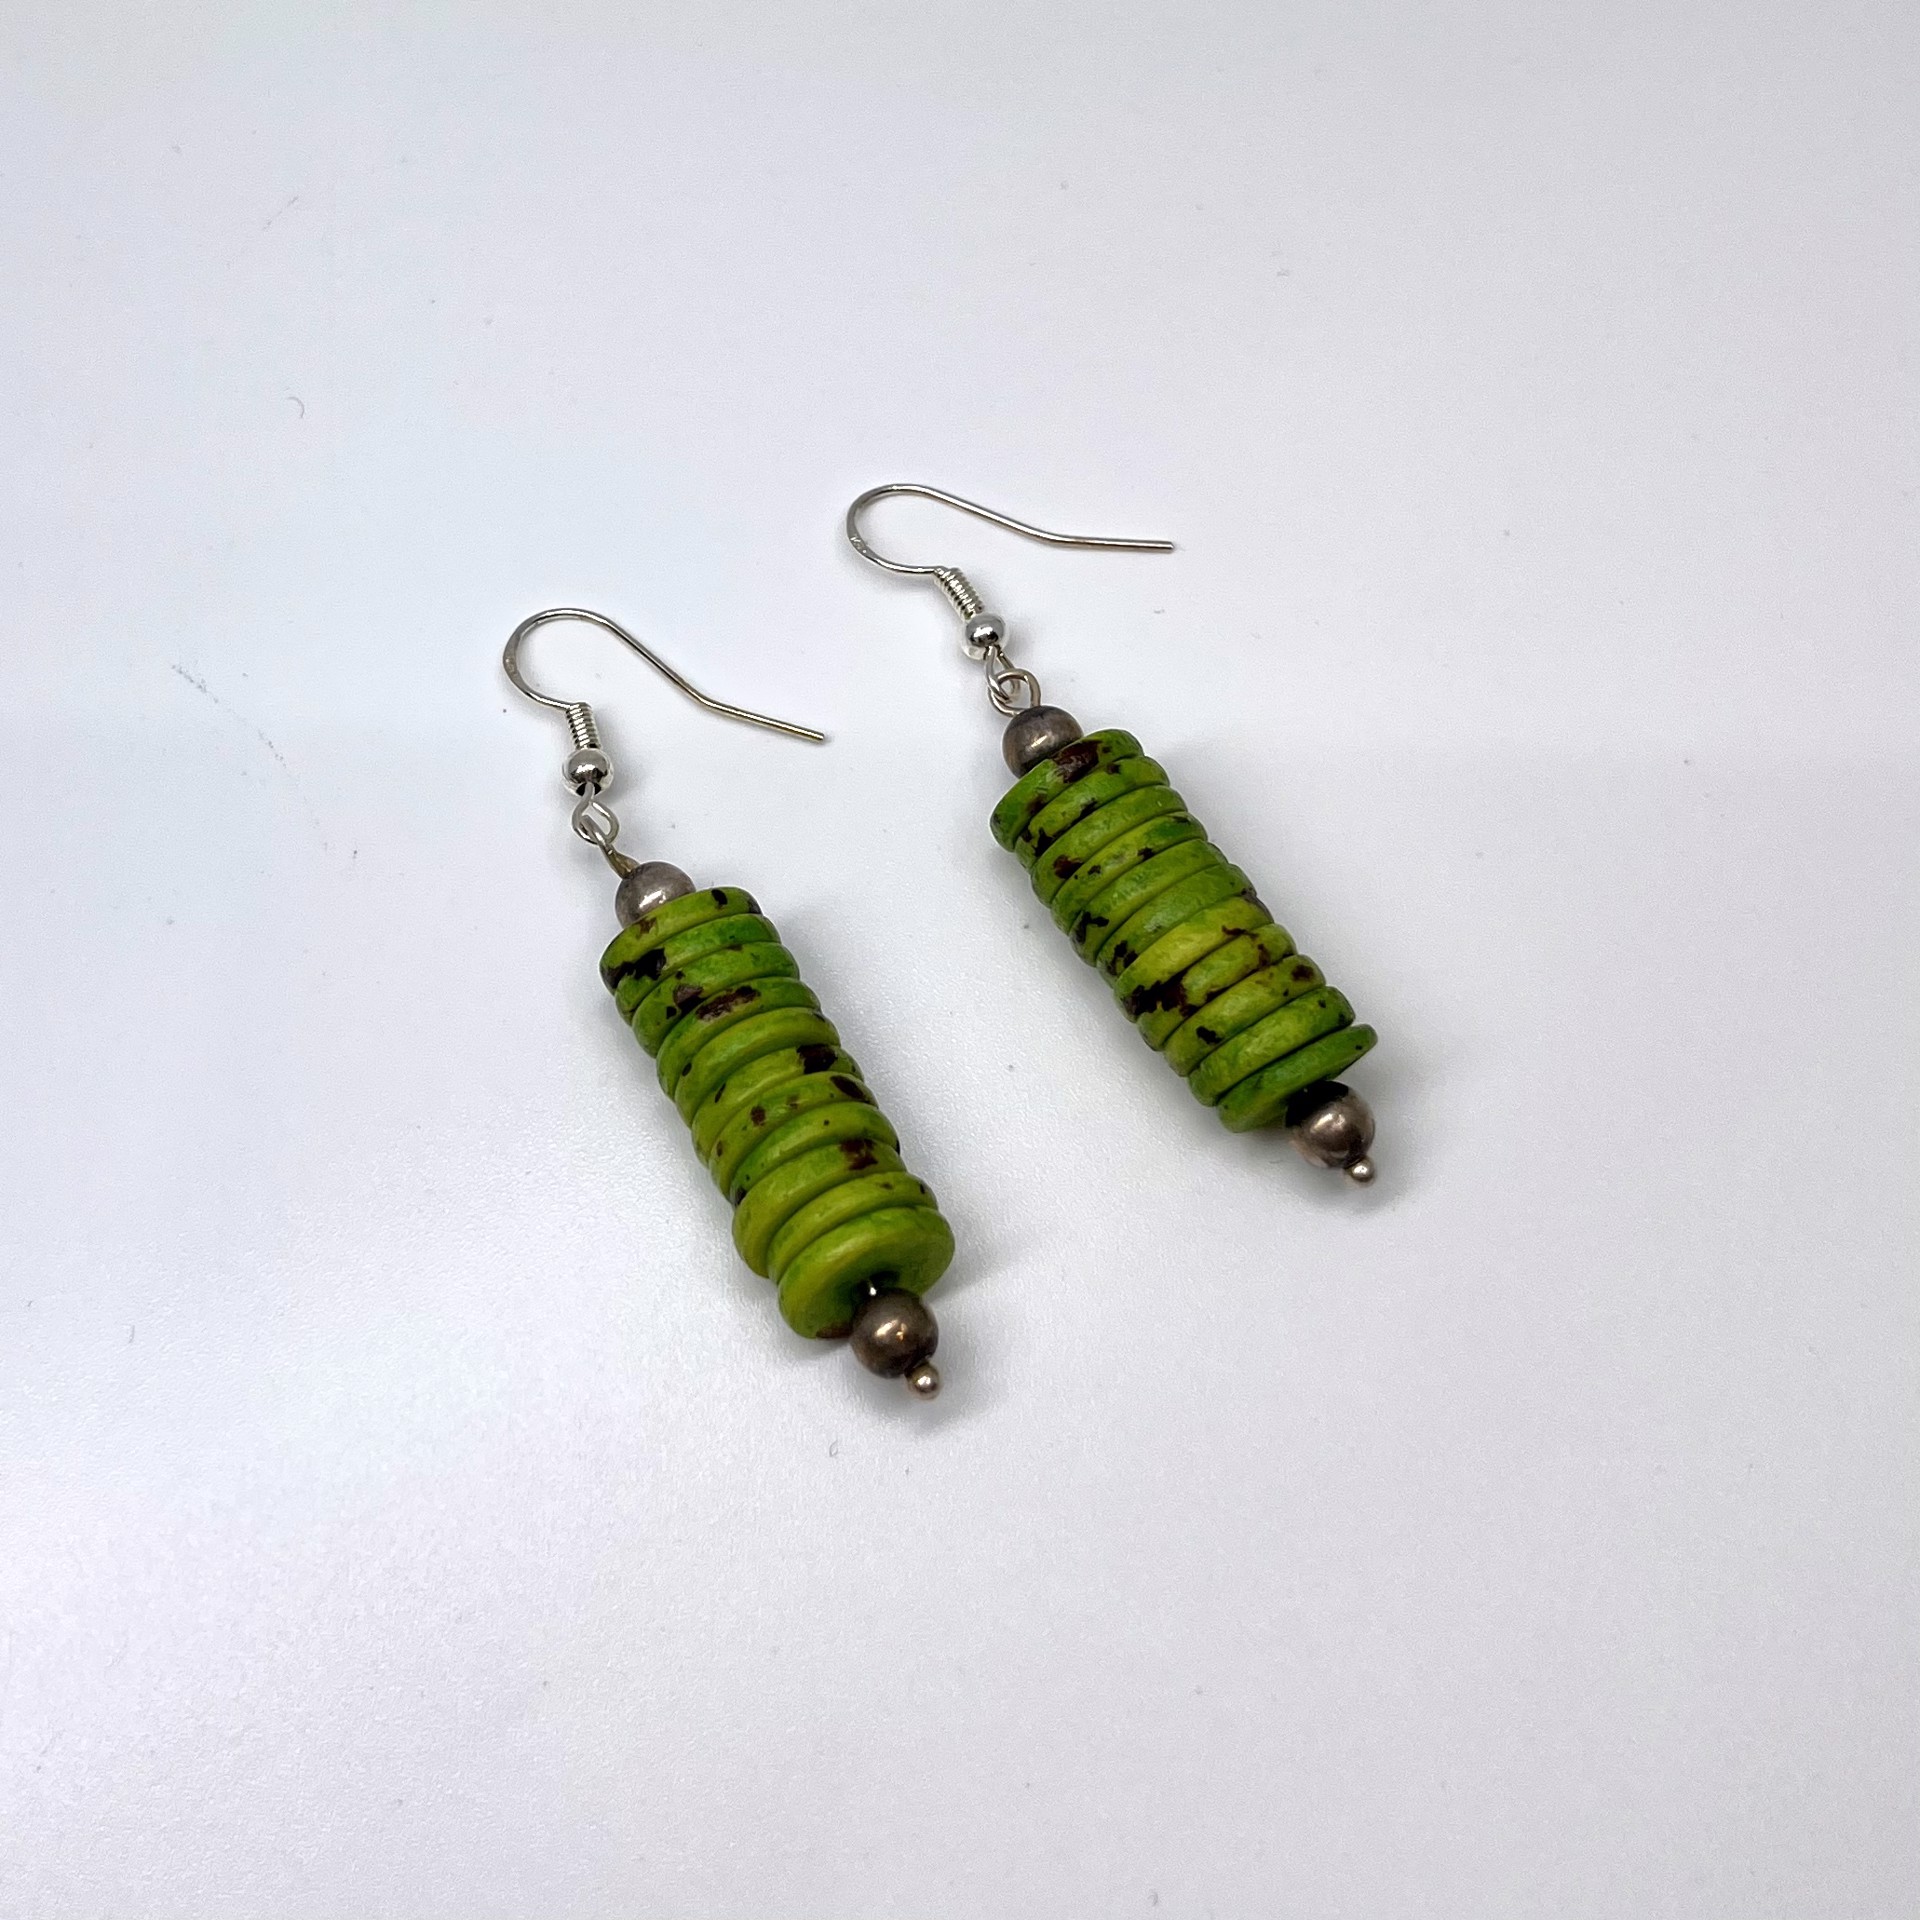 4344 Green Stacked Earrings by Gina Caruso